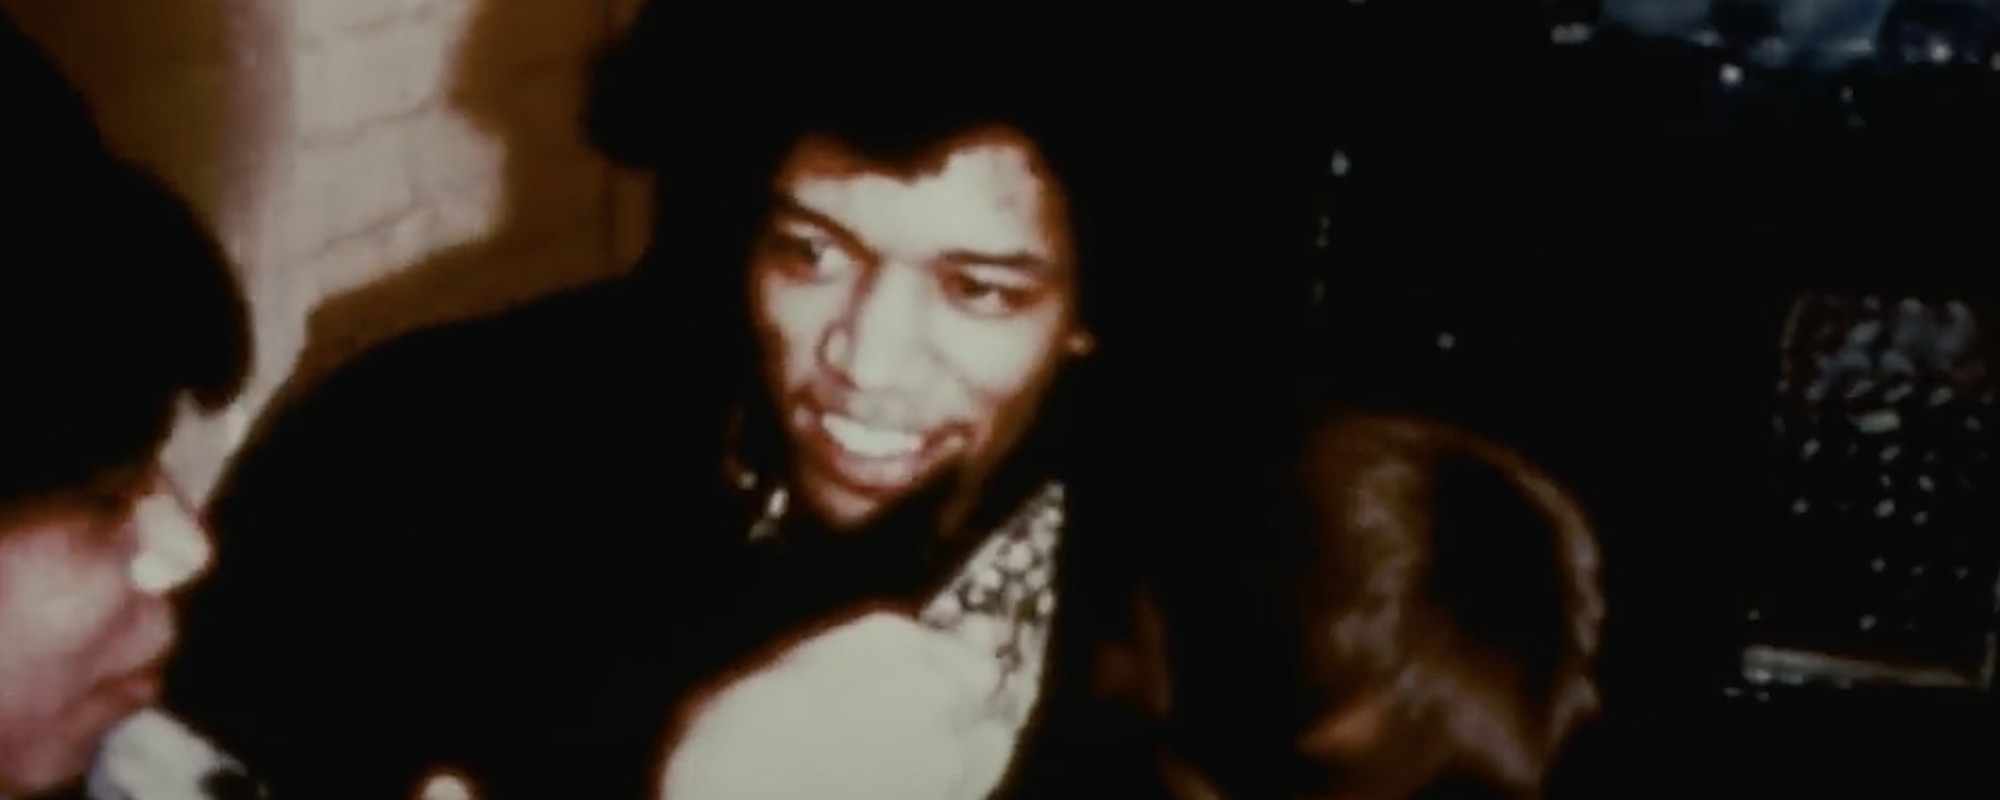 Jimi Hendrix to Receive Commemorative Plaque in London at the Hard Rock Hotel